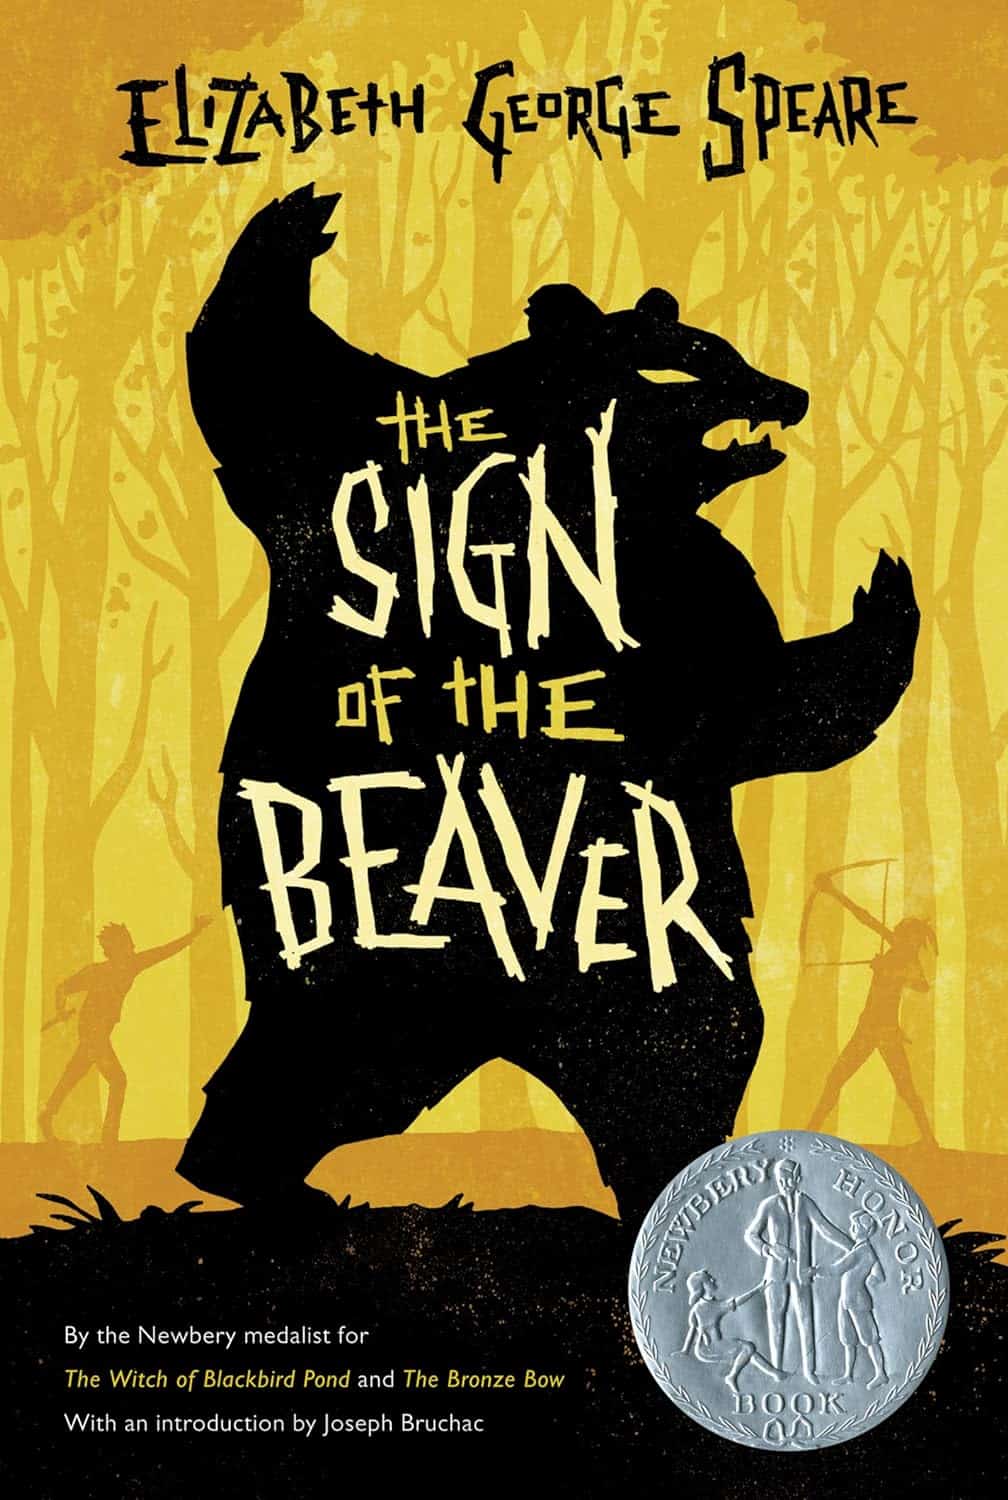 The Sign of the Beaver, by Elizabeth George Speare